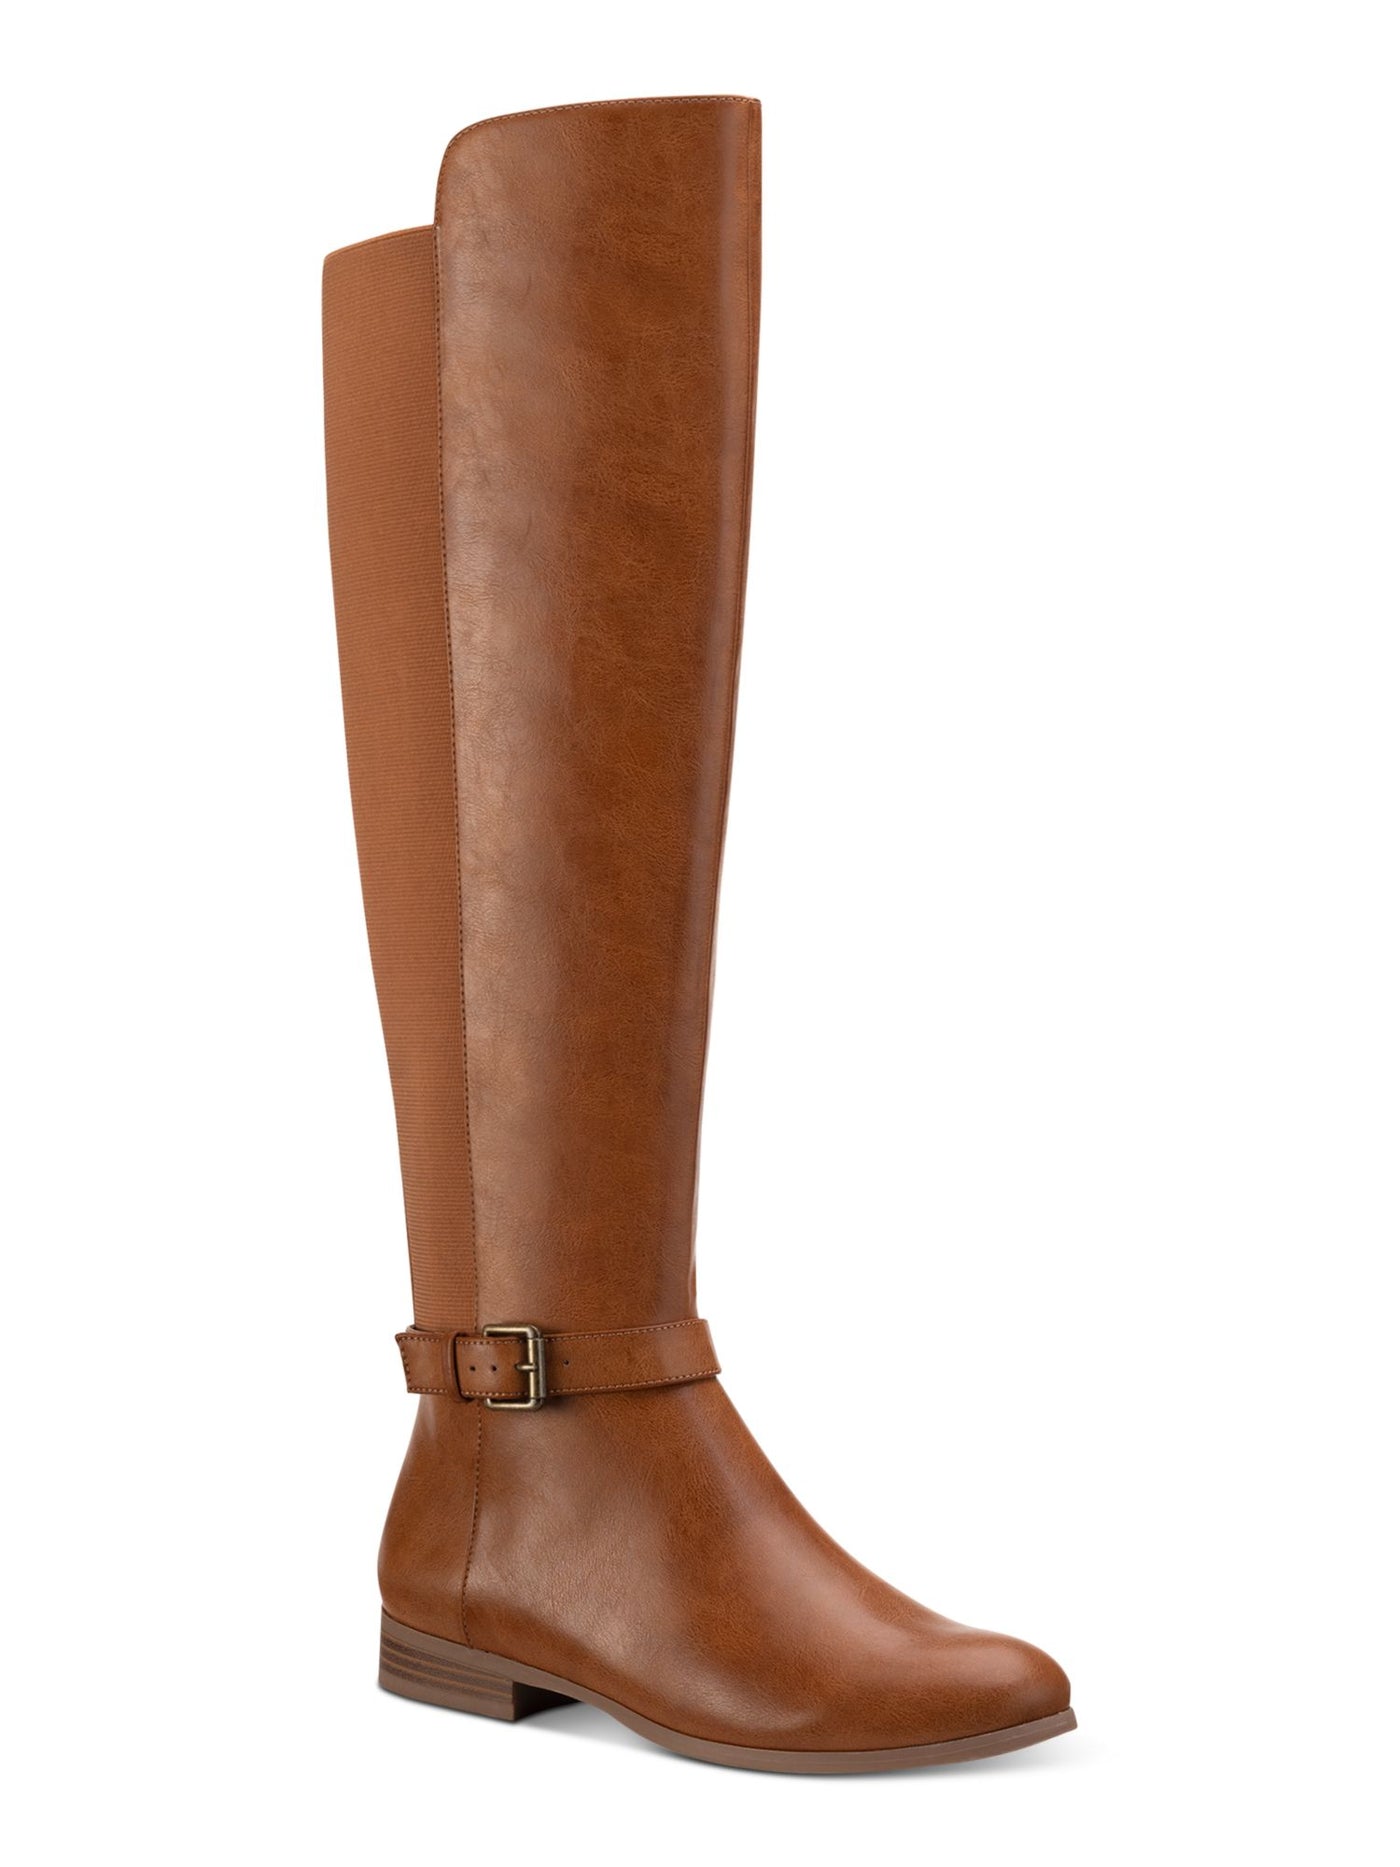 STYLE & COMPANY Womens Tan Brown Mixed Media Buckled Strap Goring Cushioned Kimmball Round Toe Block Heel Zip-Up Riding Boot 8 M WC